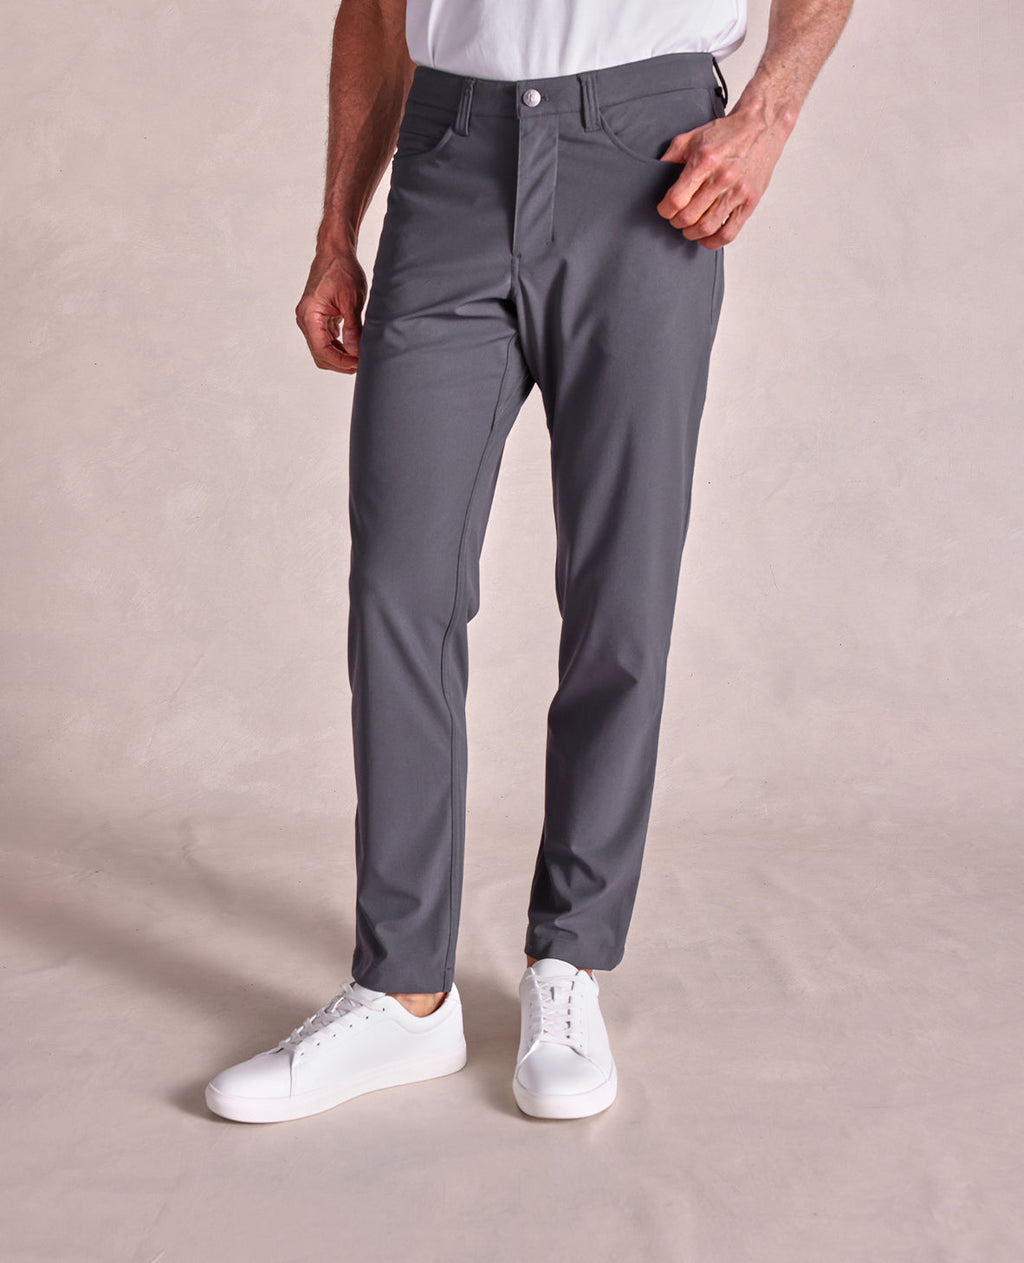 The Voyager - Performance Knit 5-Pocket Pant - Charcoal